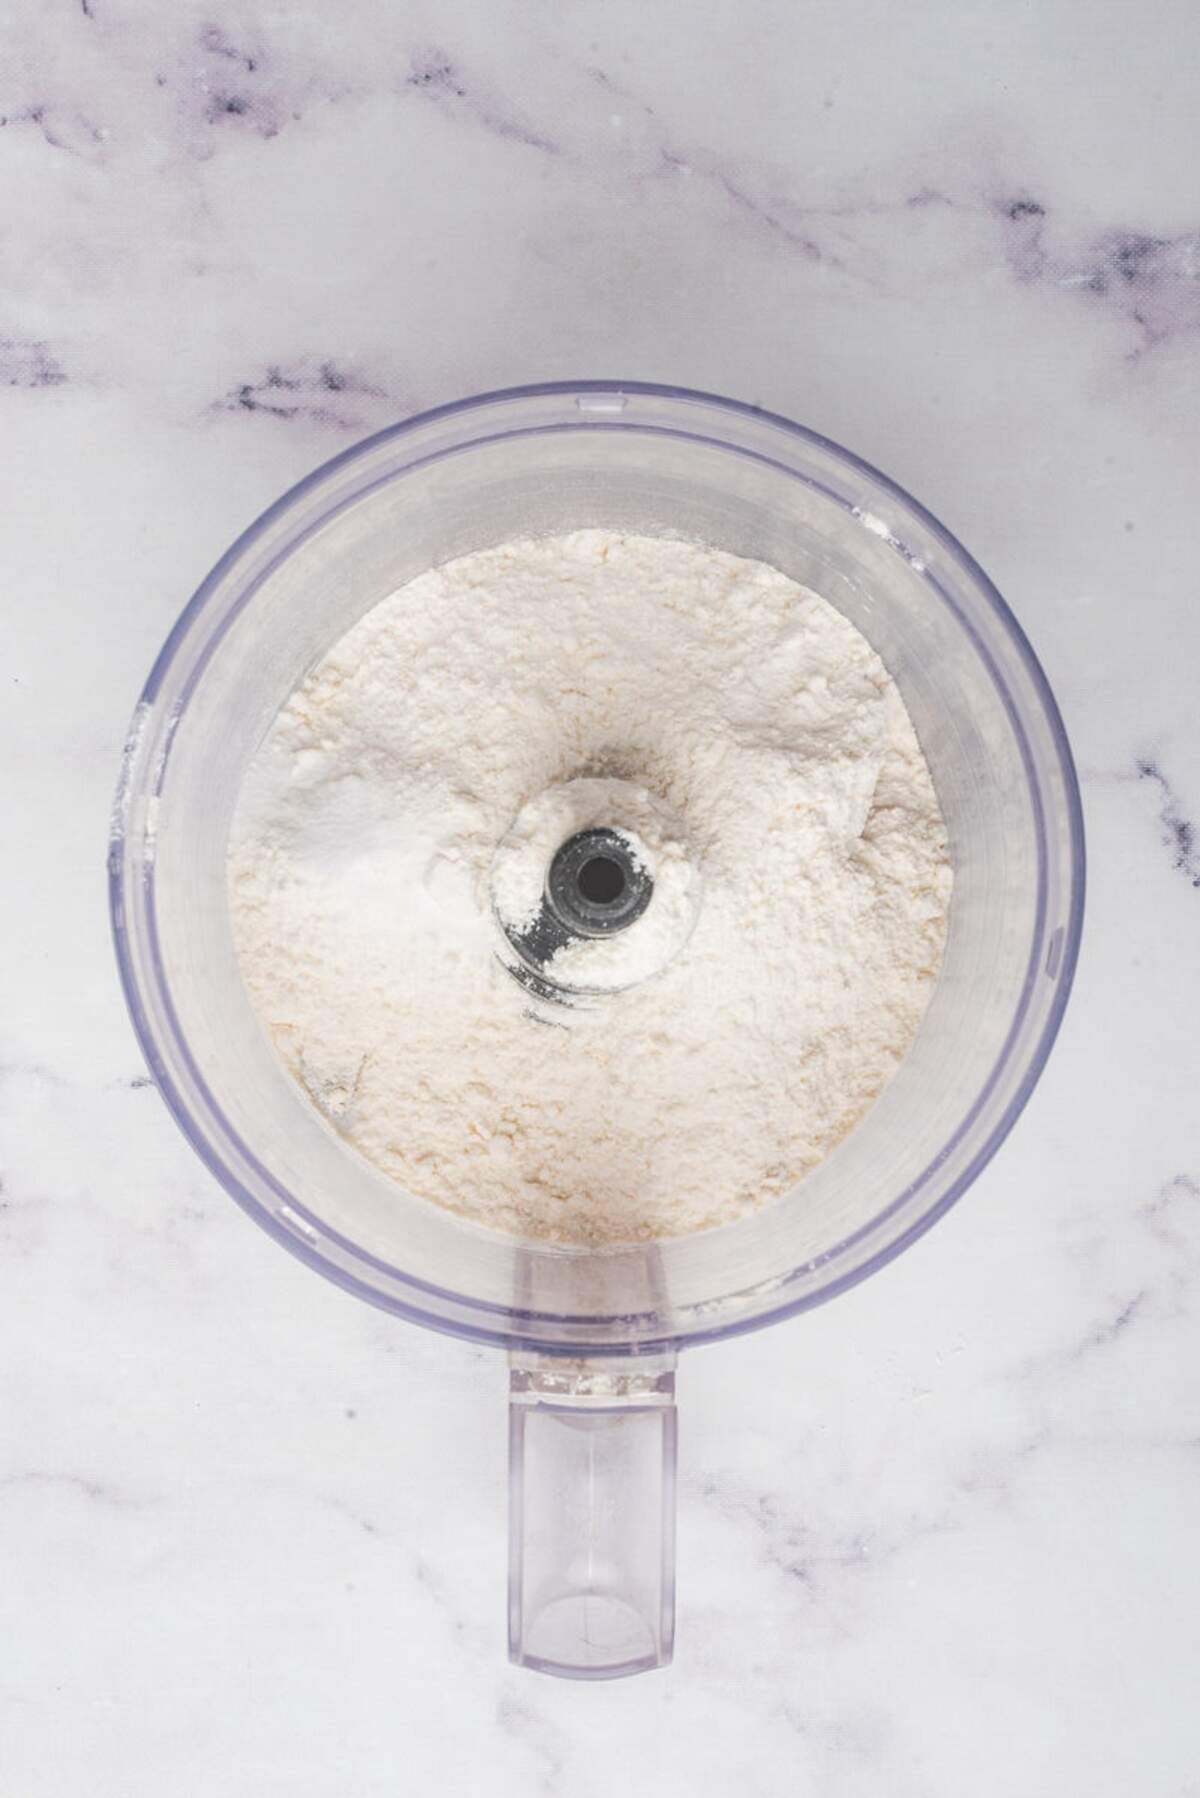 Dry ingredients, including flour, in a food processor for making pie crust.